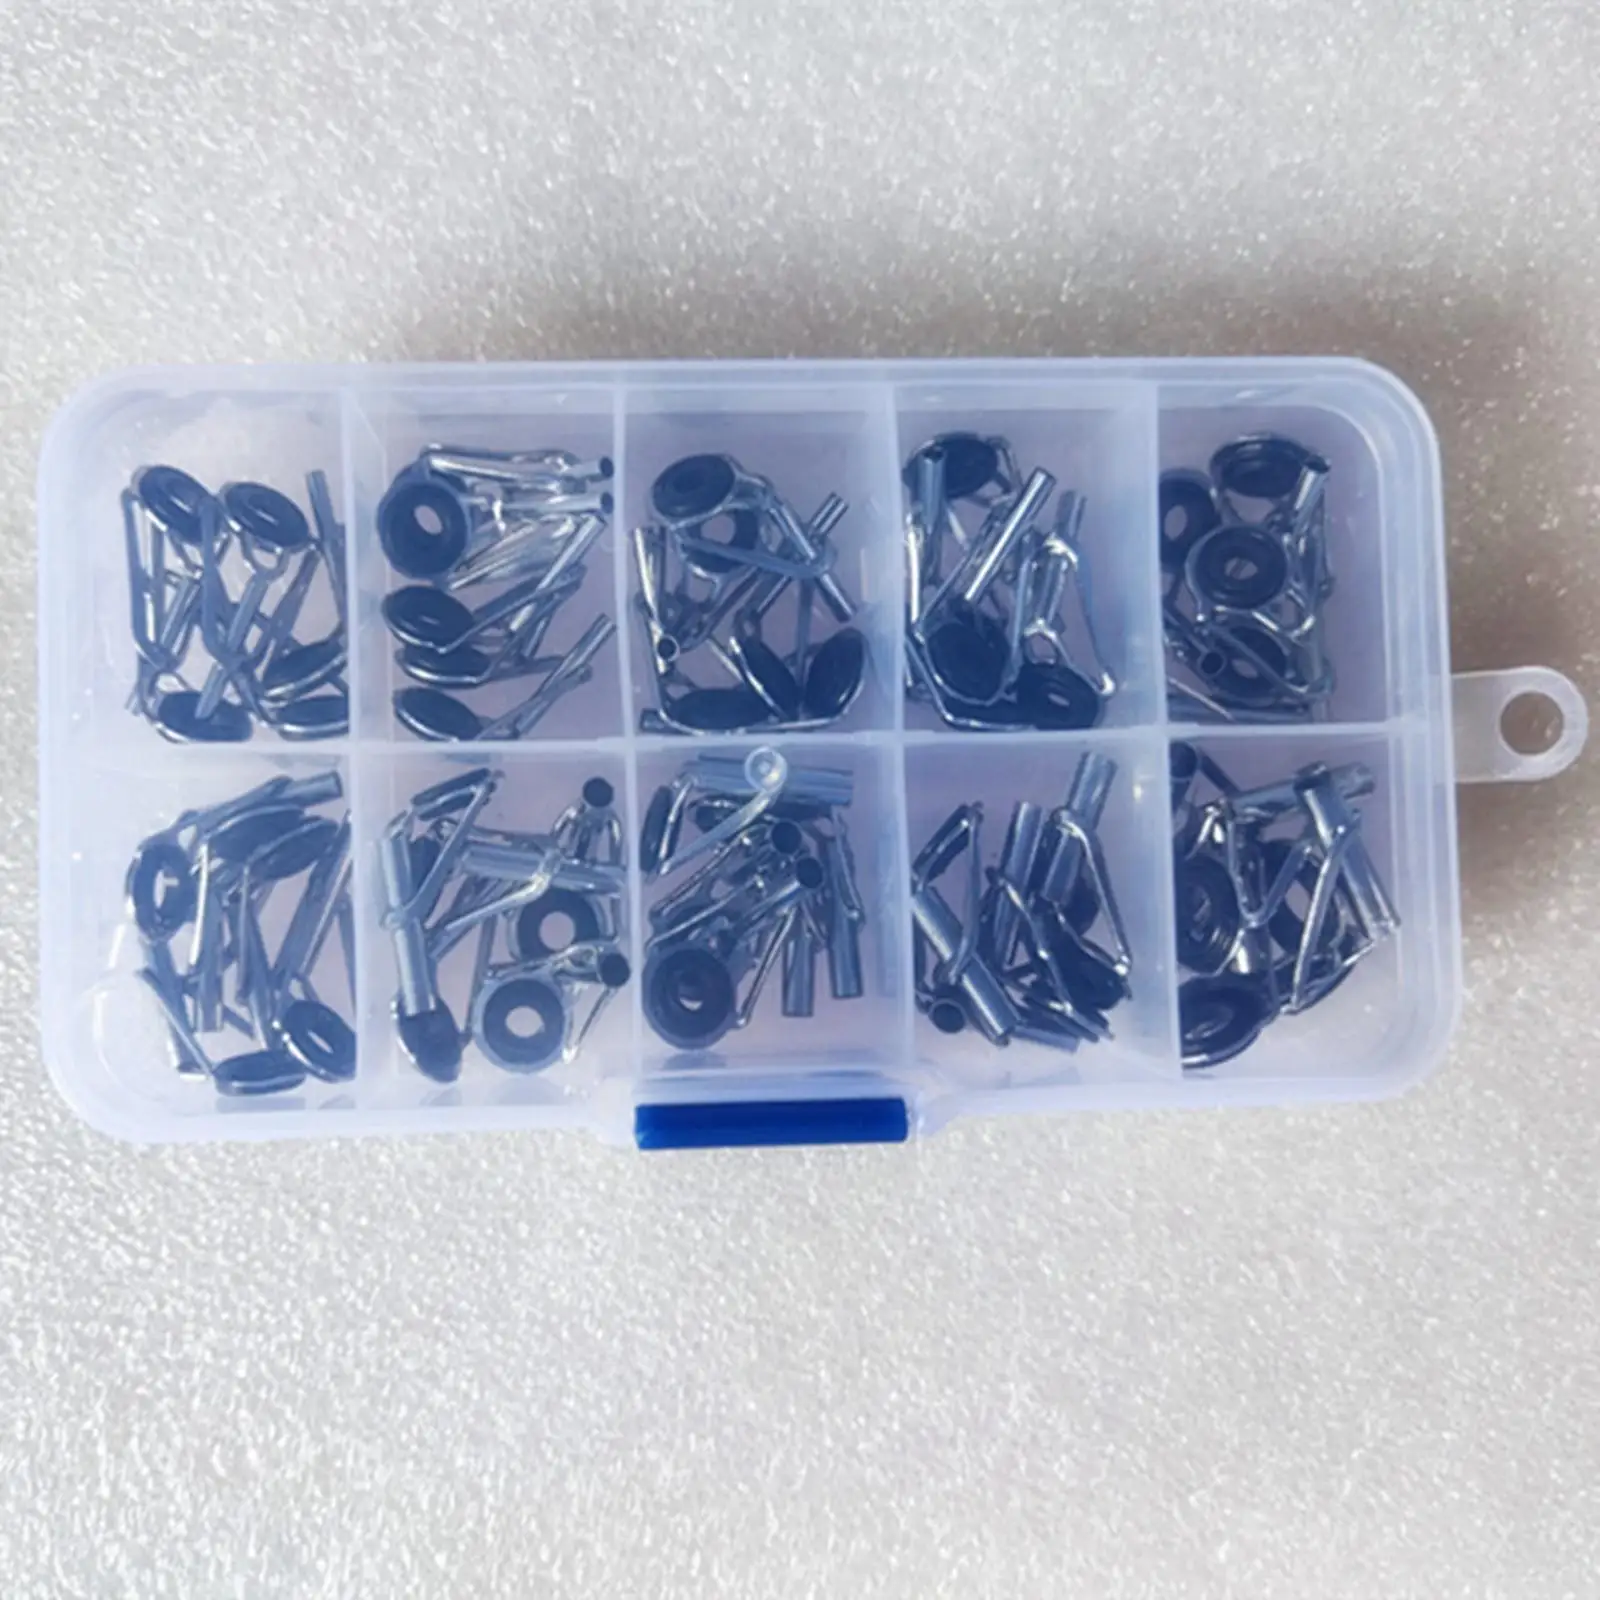 50Pcs Fishing Rod Guides Ring Set Mixed Size in A Box Guide Eye Durable DIY Eye Rings Top Rings Top Ring for Building Component